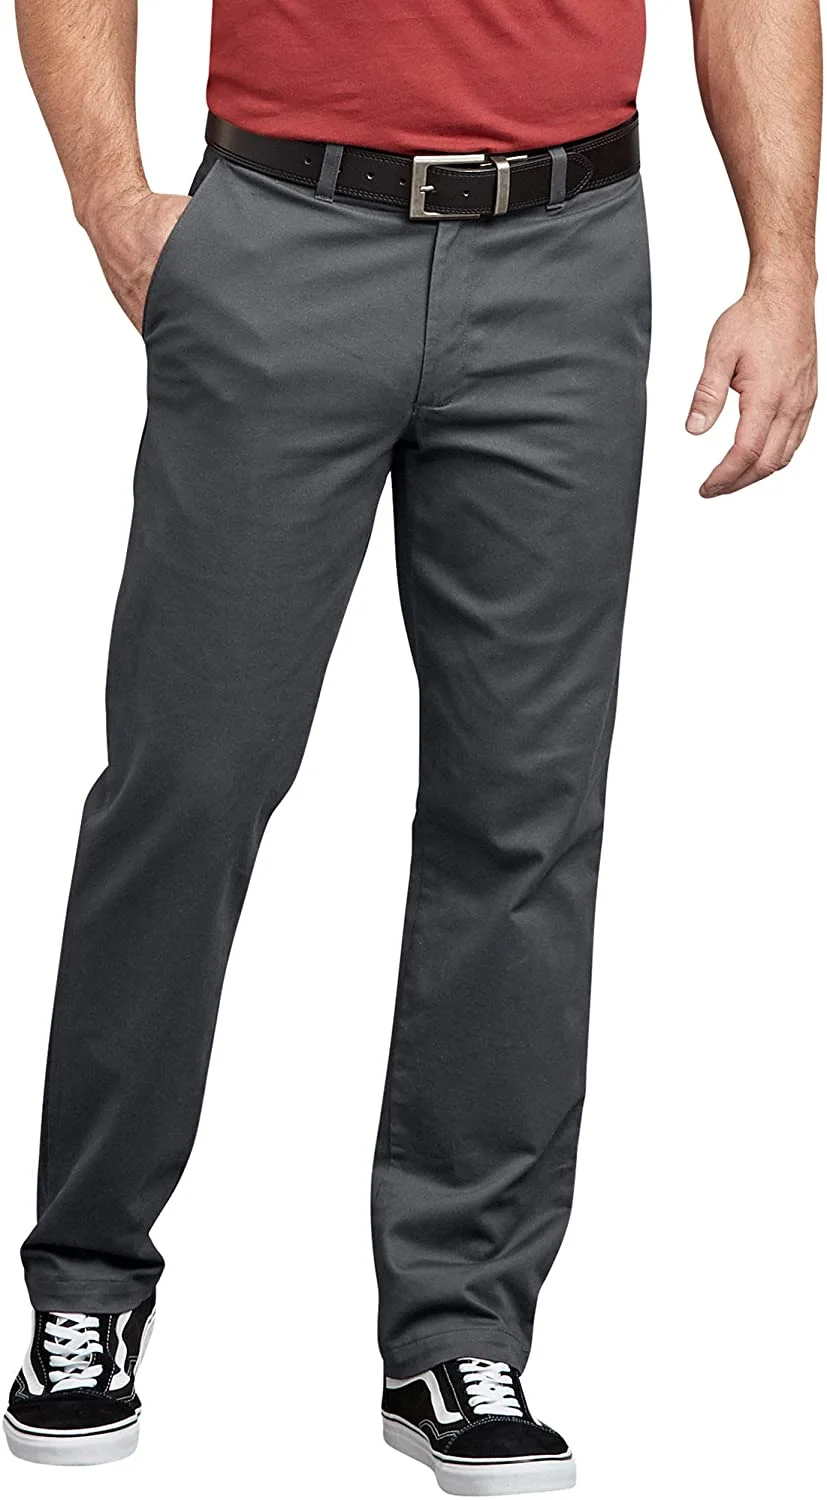 Twill Pants - Bangladesh Factory, Suppliers, Manufacturers